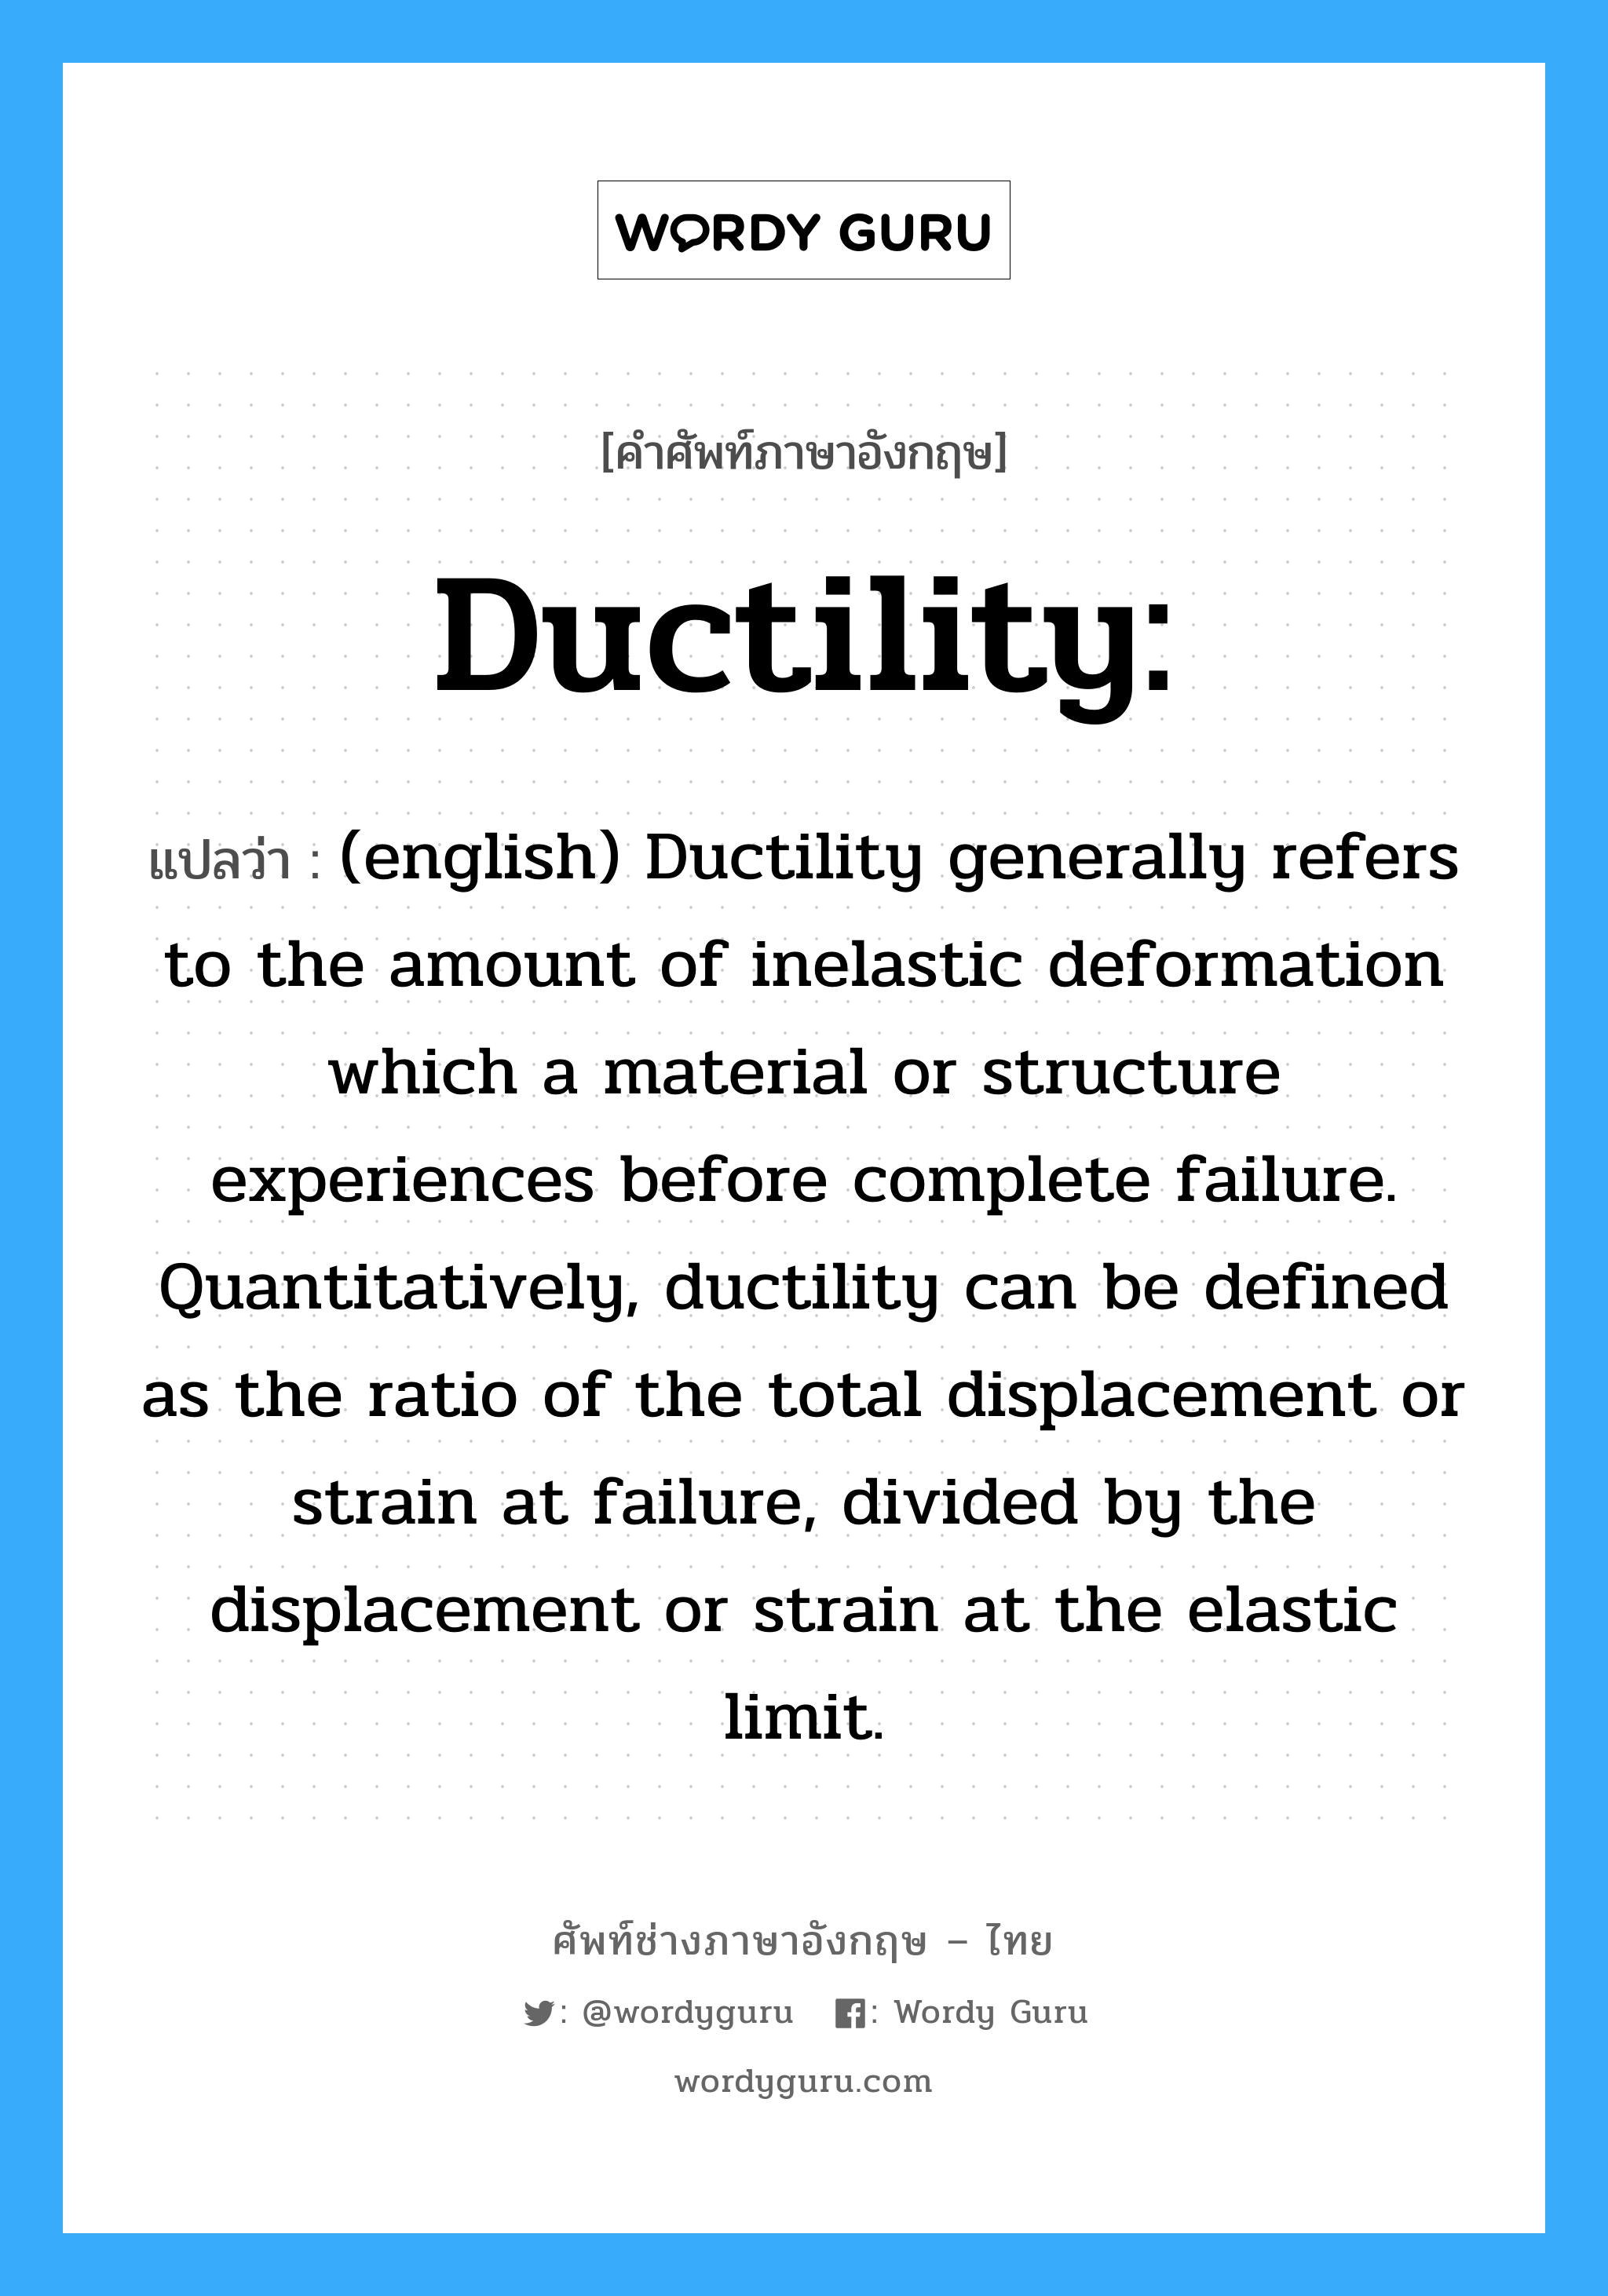 Ductility: แปลว่า?, คำศัพท์ช่างภาษาอังกฤษ - ไทย Ductility: คำศัพท์ภาษาอังกฤษ Ductility: แปลว่า (english) Ductility generally refers to the amount of inelastic deformation which a material or structure experiences before complete failure. Quantitatively, ductility can be defined as the ratio of the total displacement or strain at failure, divided by the displacement or strain at the elastic limit.